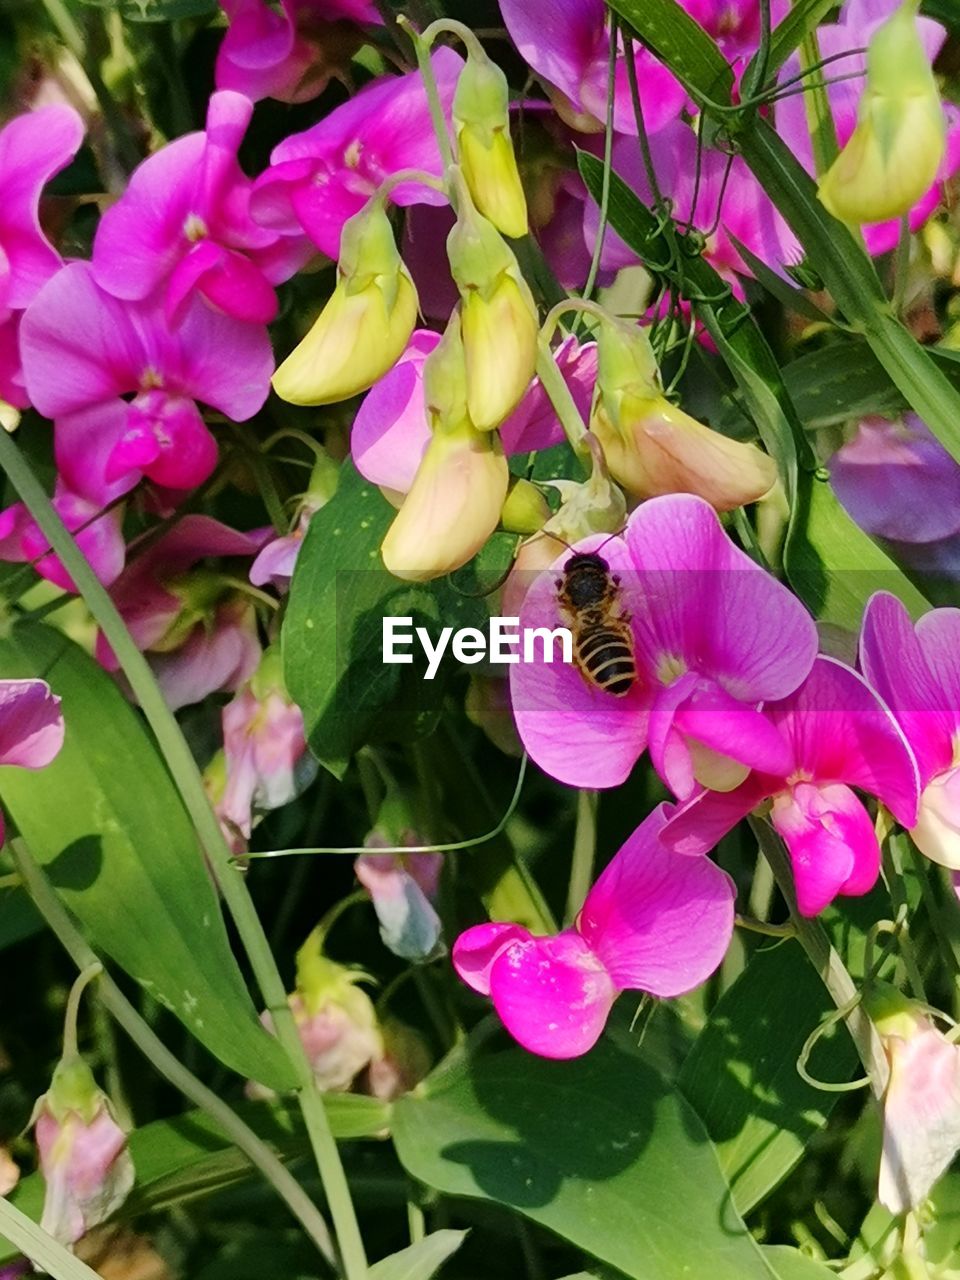 plant, flower, flowering plant, beauty in nature, freshness, growth, pink, petal, fragility, nature, flower head, close-up, plant part, leaf, inflorescence, purple, no people, orchid, day, springtime, outdoors, green, botany, blossom